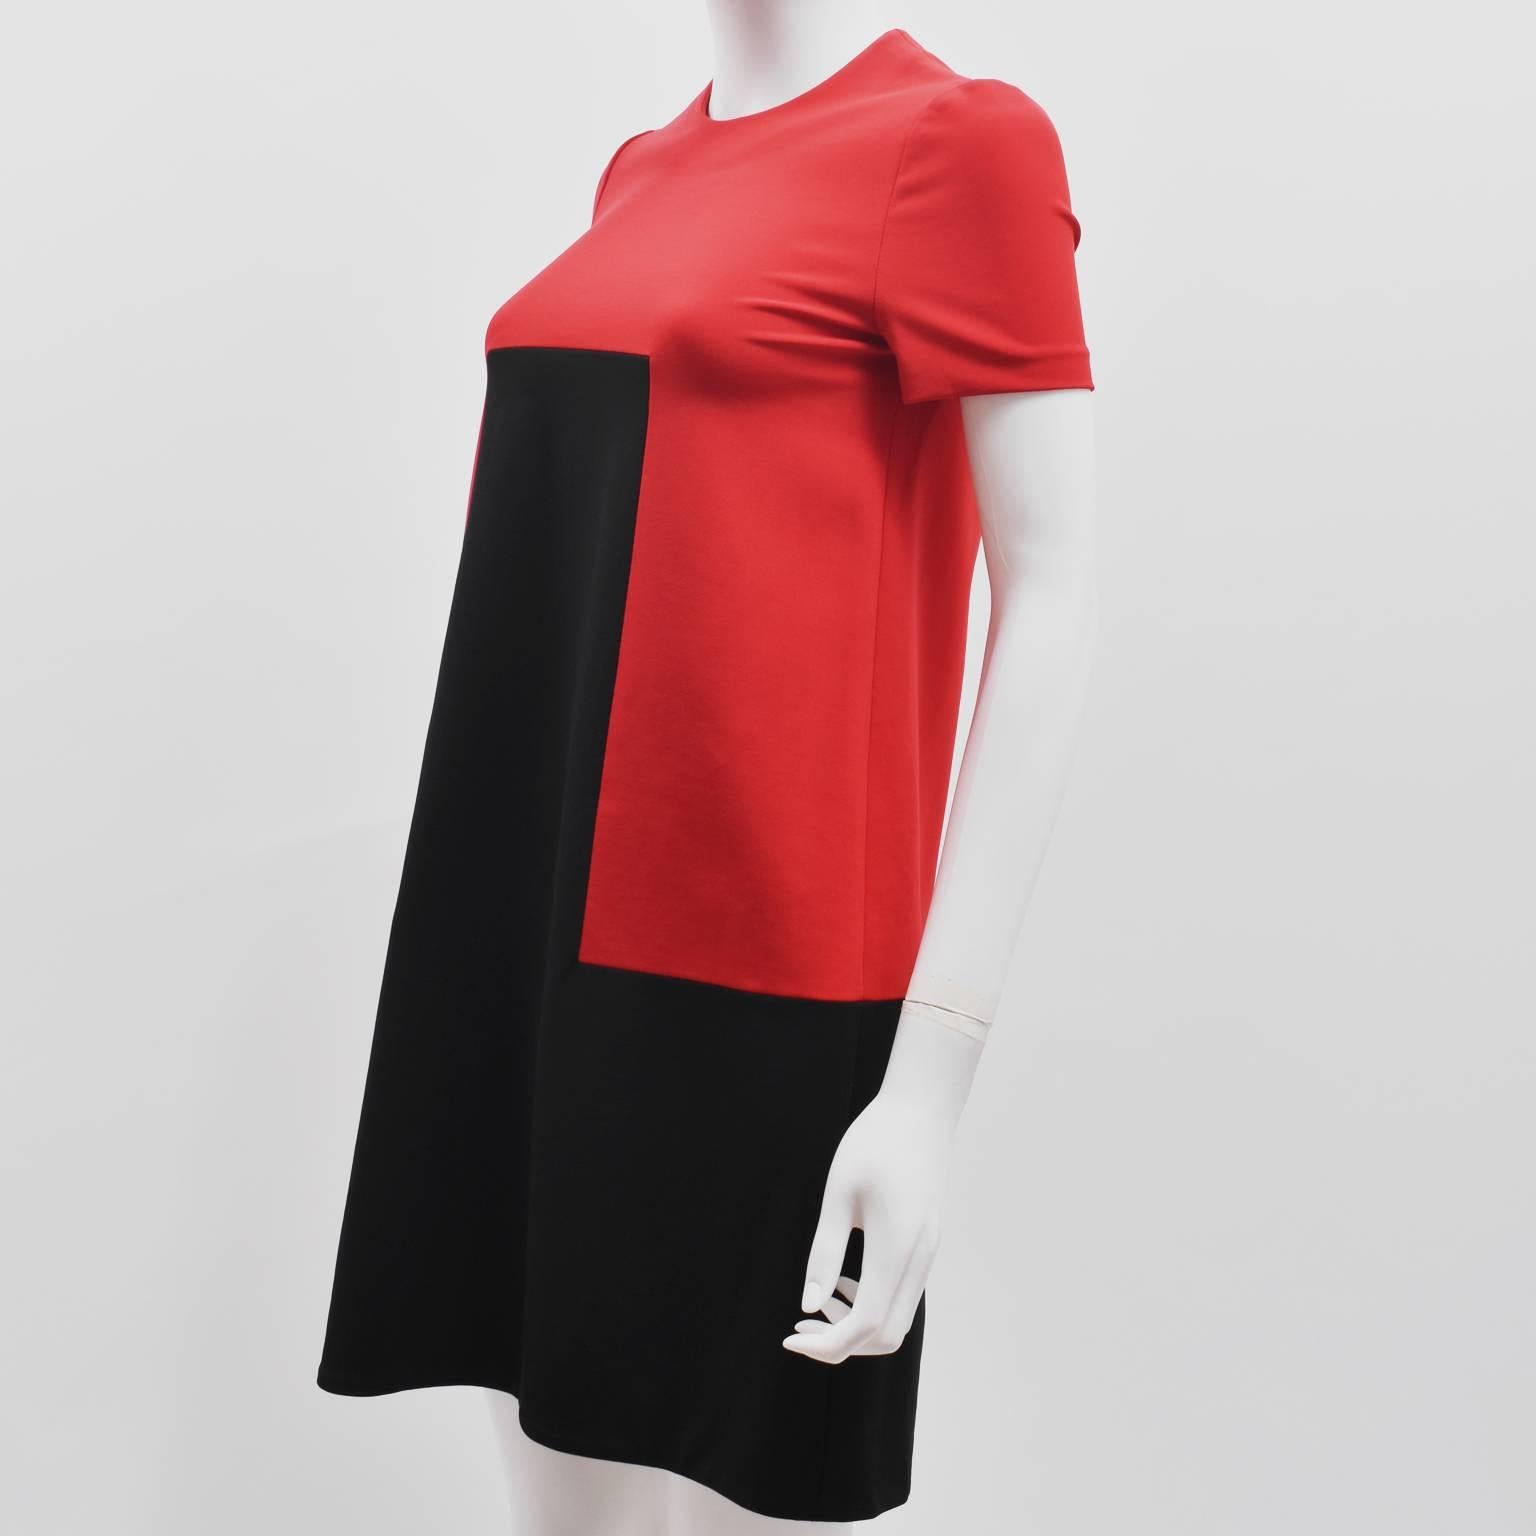 An elegant and simple shift dress from Alexander McQueen. The dress has short sleeves, and a triangular A-line cut. The dress is made from a Rayon blend in contrast red and black in a geometric shape. It is in excellent condition with no signs of